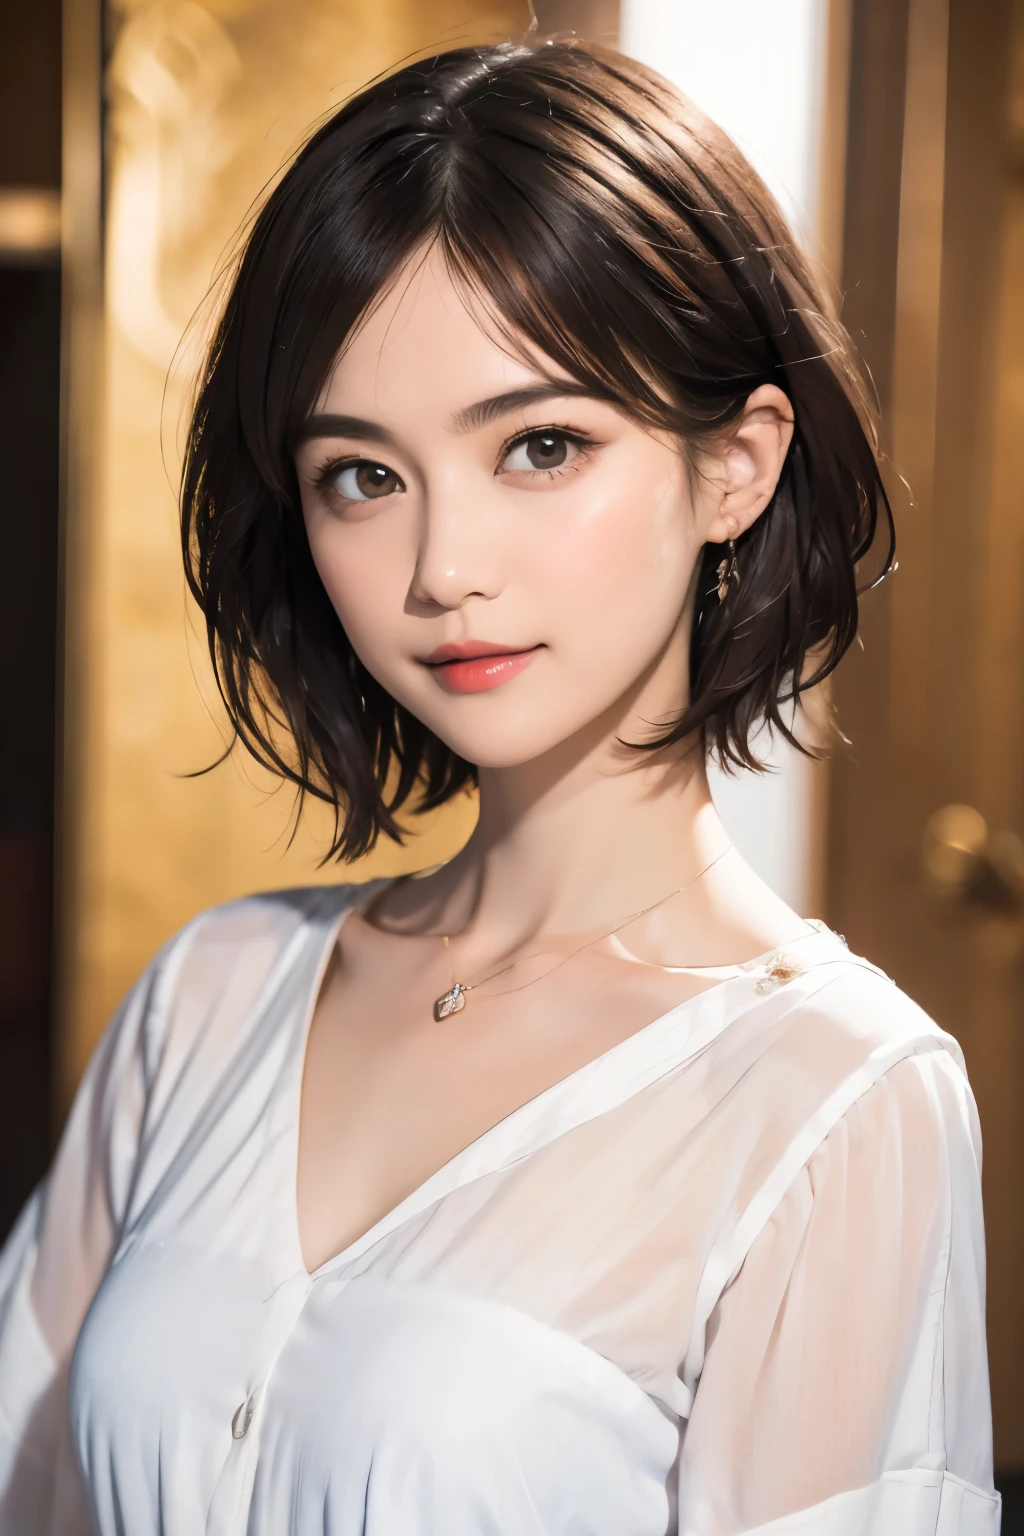 144
(20 year old woman,Are standing), (Super realistic), (high resolution), ((beautiful hairstyle 46)), ((short hair:1.46)), (gentle smile), (brest:1.1), (lipstick)
